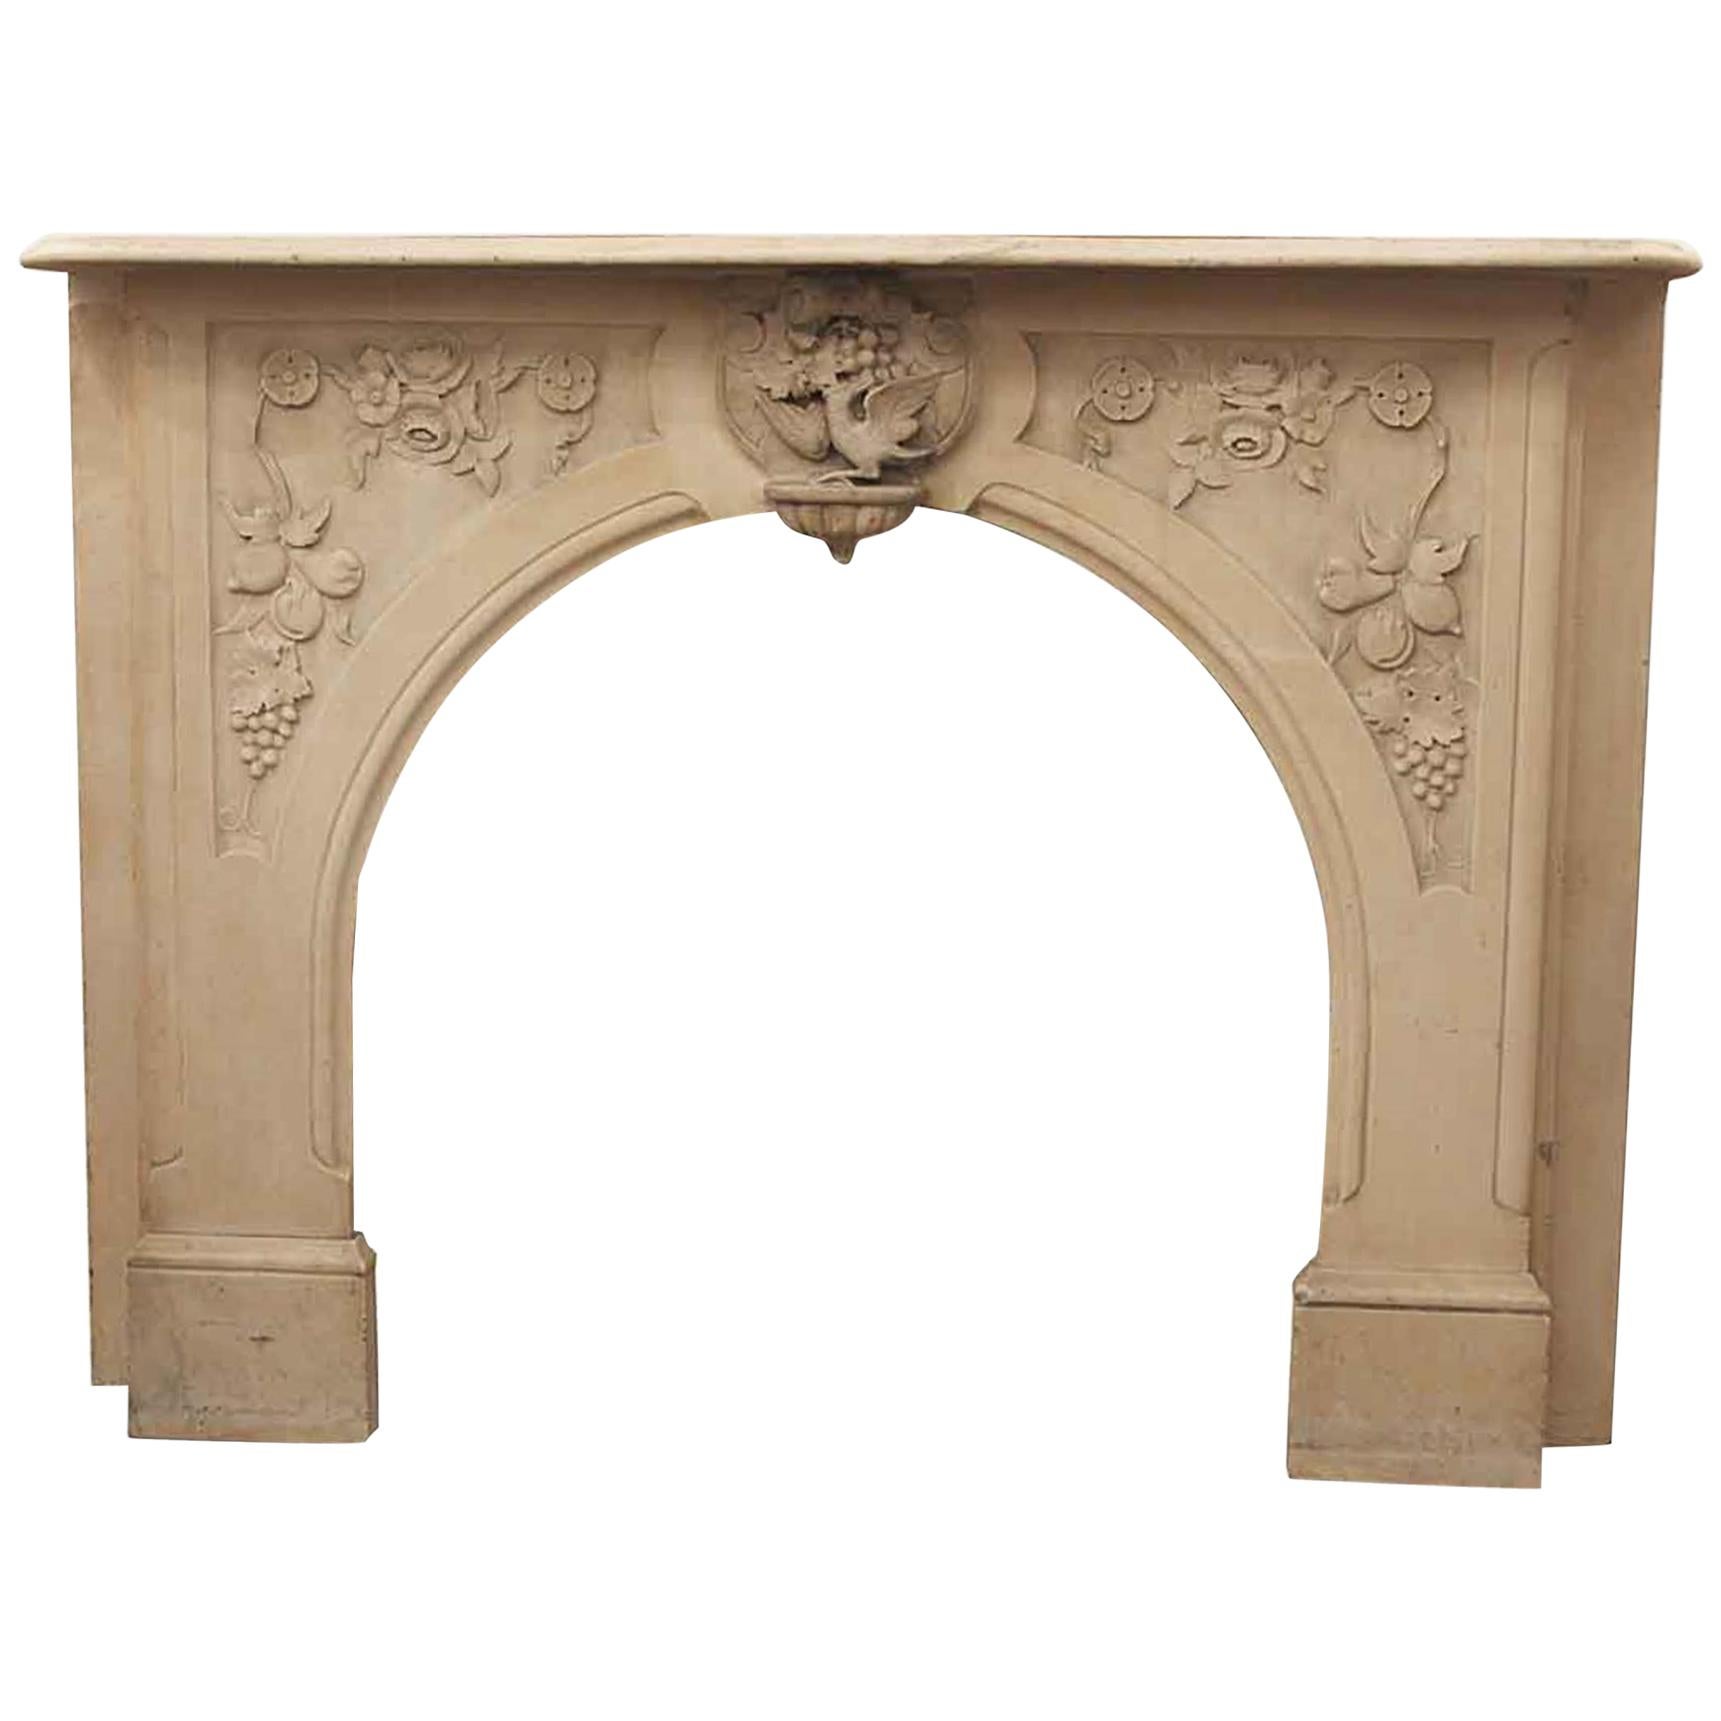 1900s Victorian Hand Carved Tan Arched Marble Mantel with Bird and Floral Motif